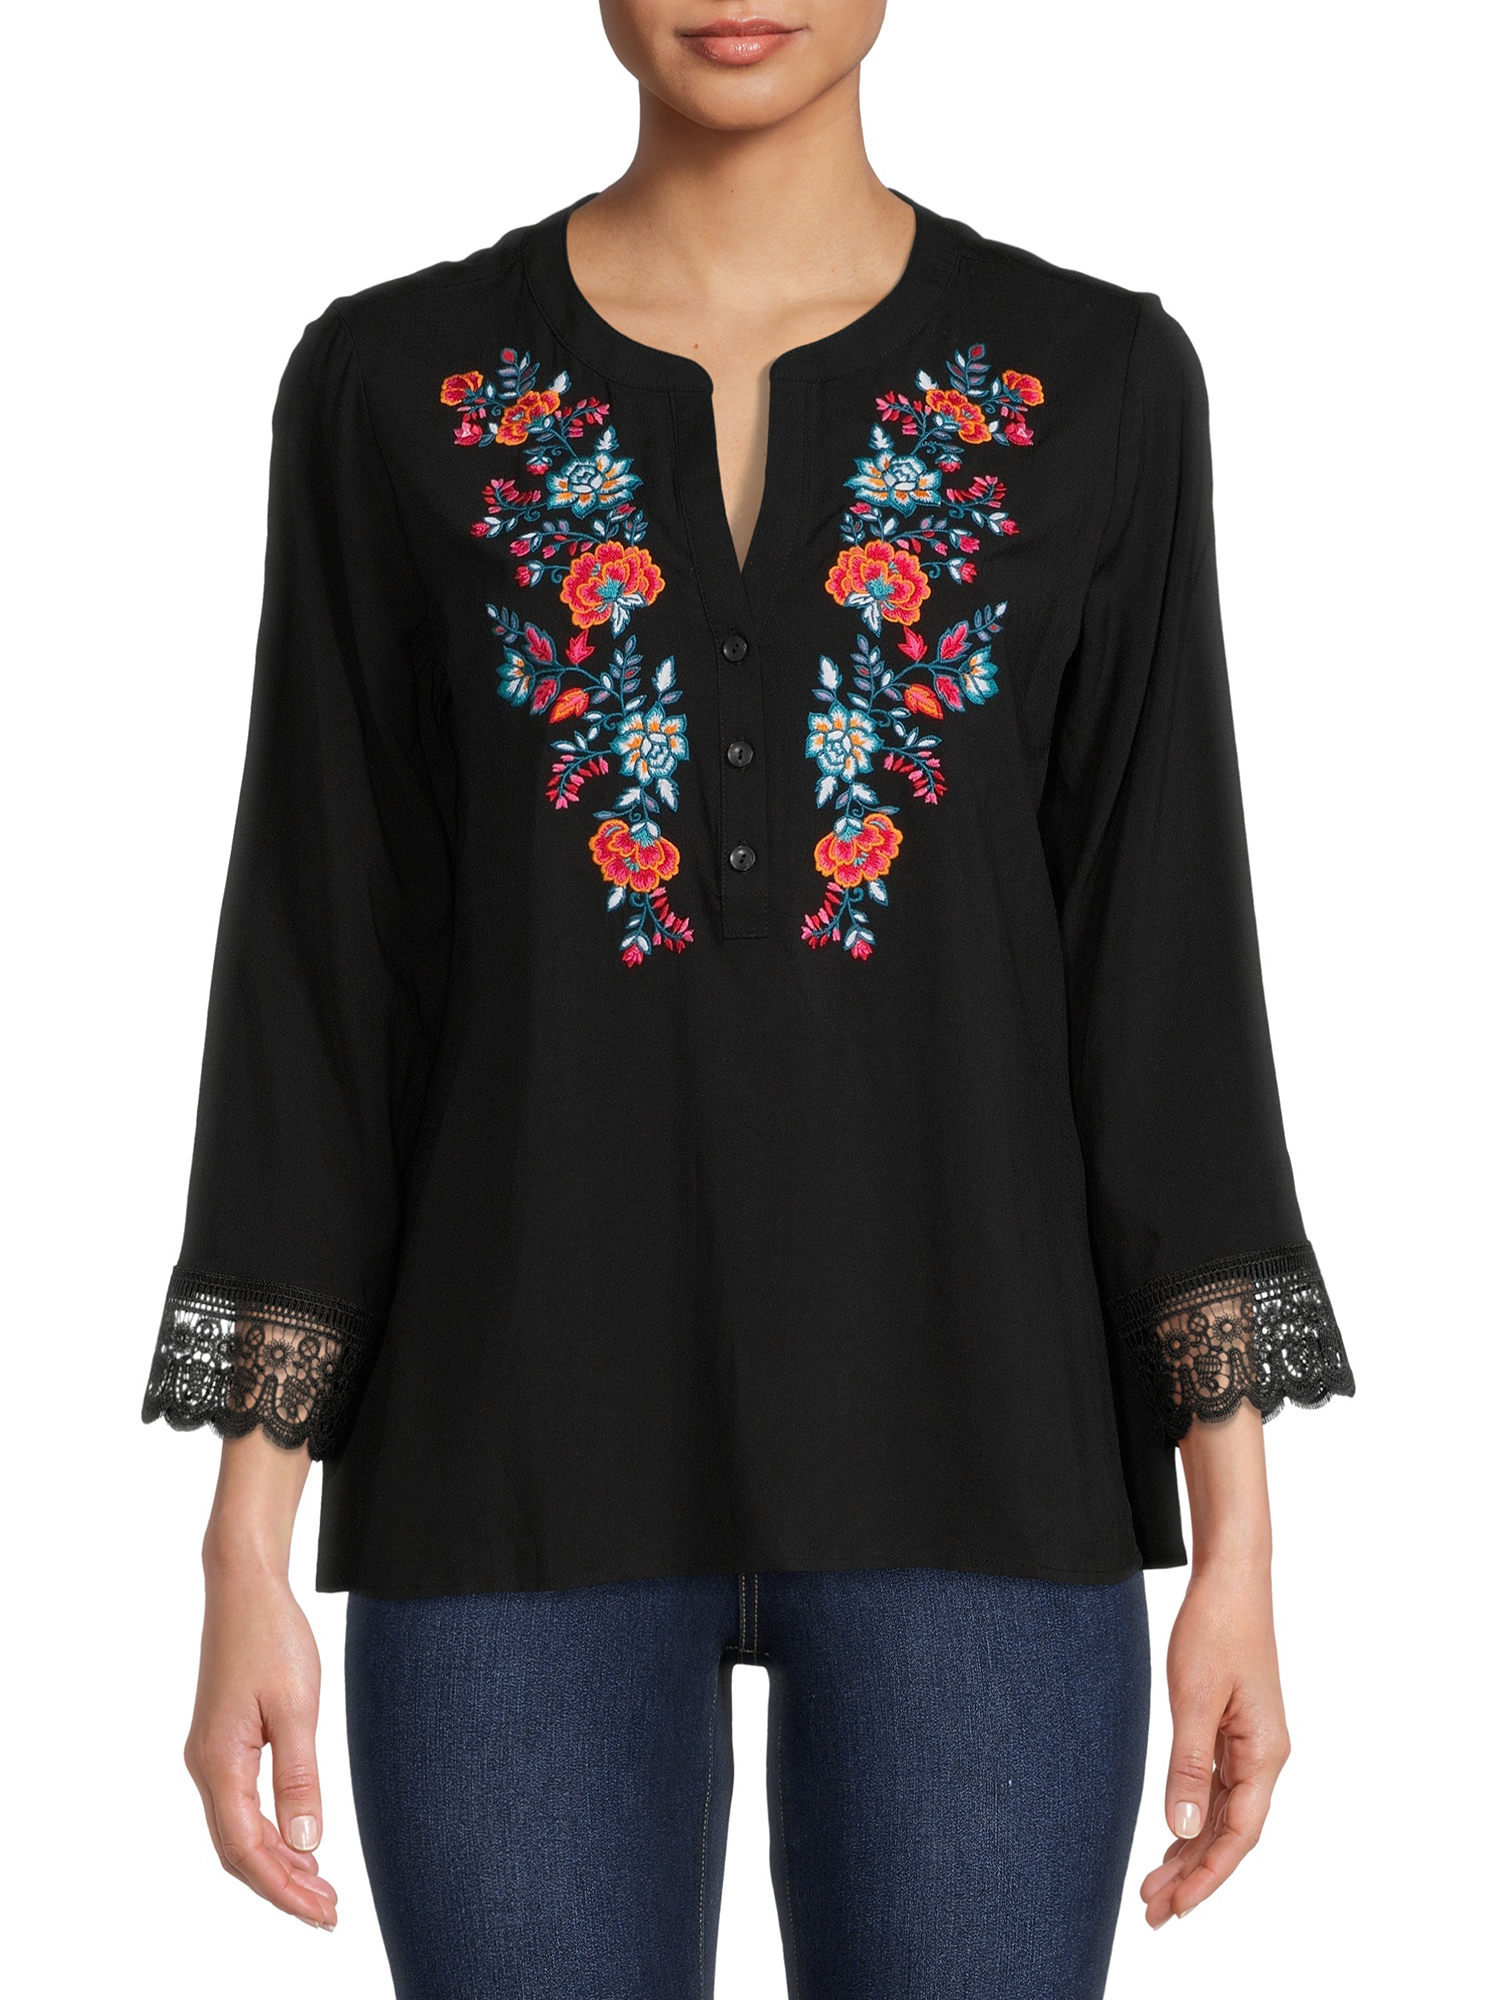 The Pioneer Woman Embroidered Tunic Blouse, Women’s - image 5 of 8